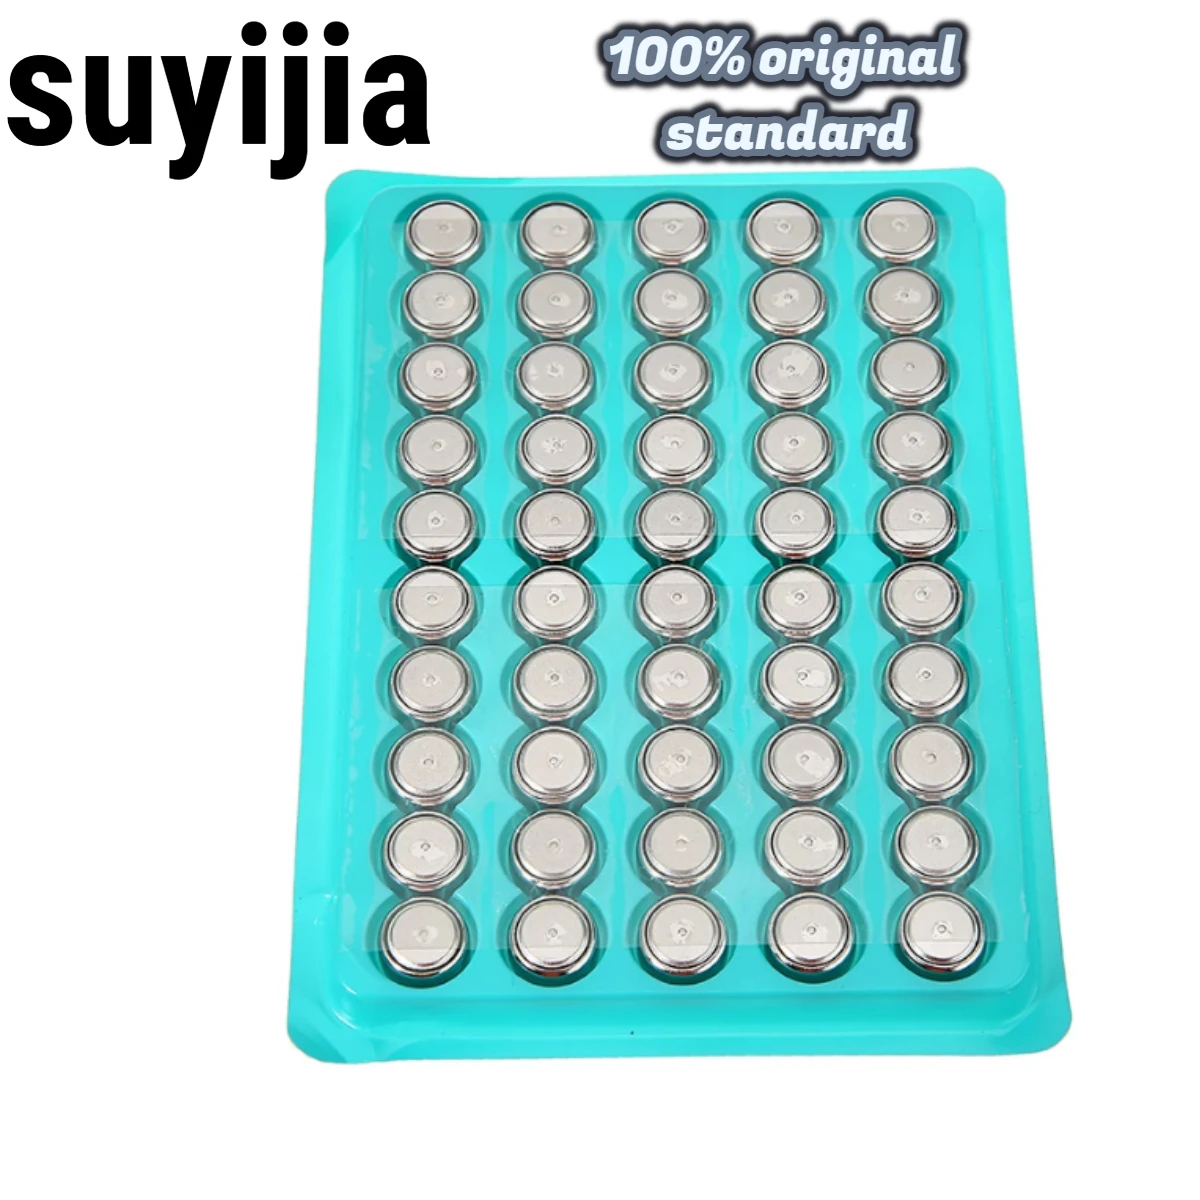 

SUYIJIA 50pcs Watches Cell Coin Battery LR44 L1154 357 SR44 Alkaline Button Batteries AG13 1.5V For Watch/remote control/car key